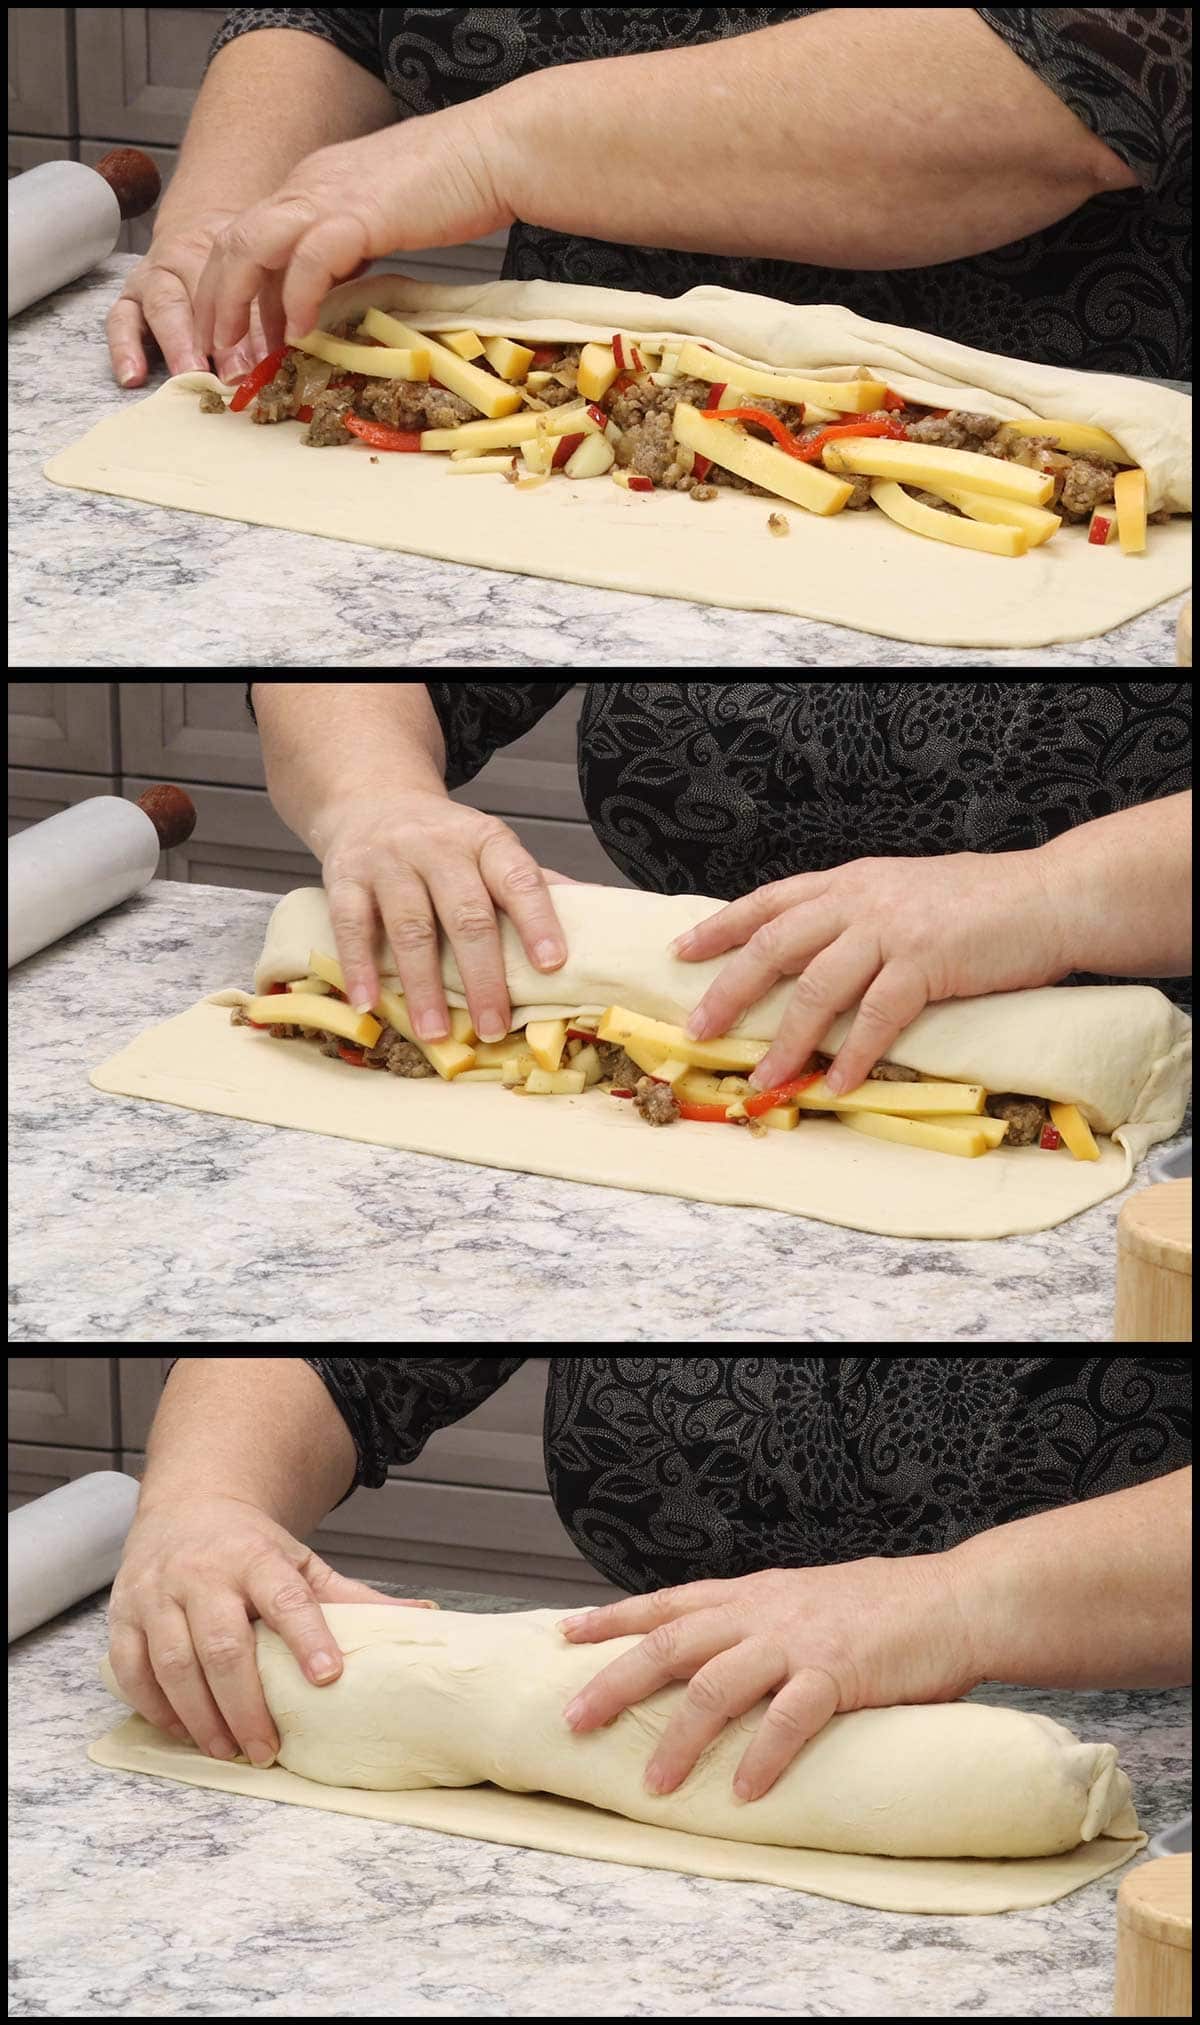 pinching ends and finishing wrapping stromboli.